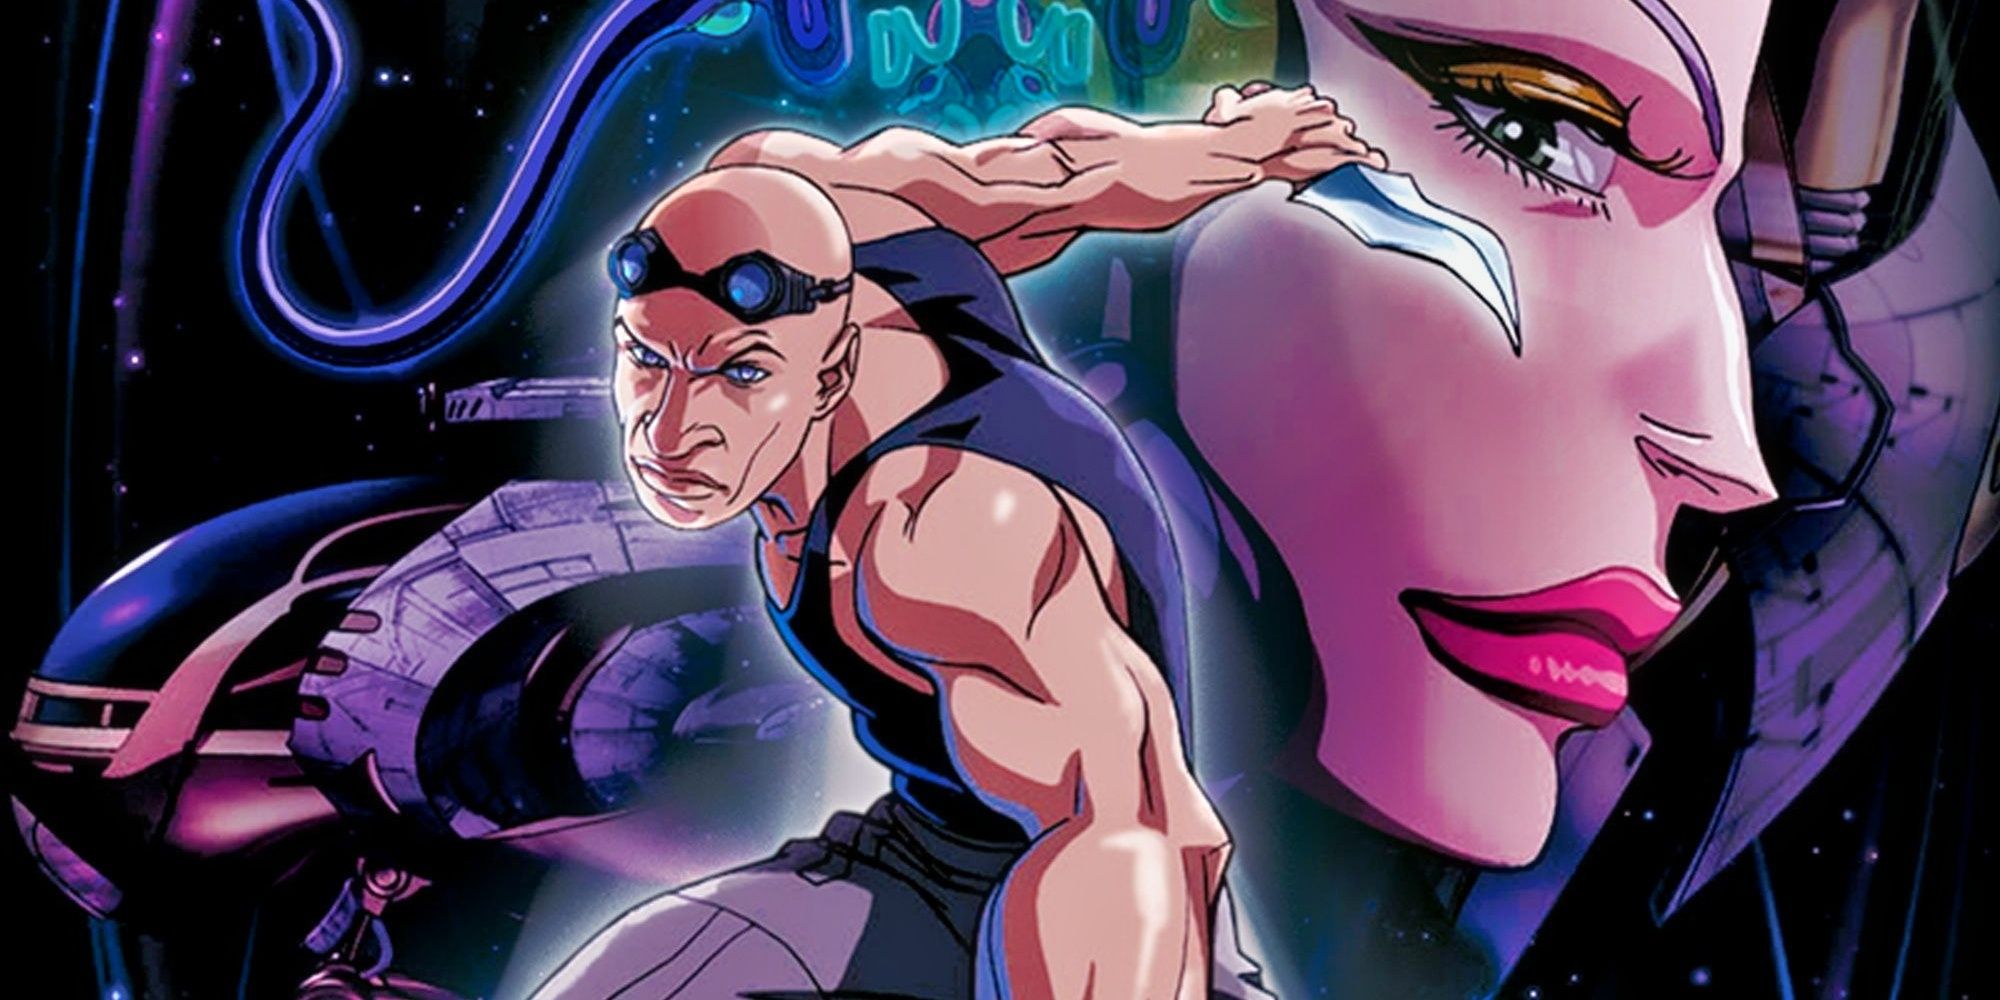 Riddick holding a knife on the cover of Dark Fury